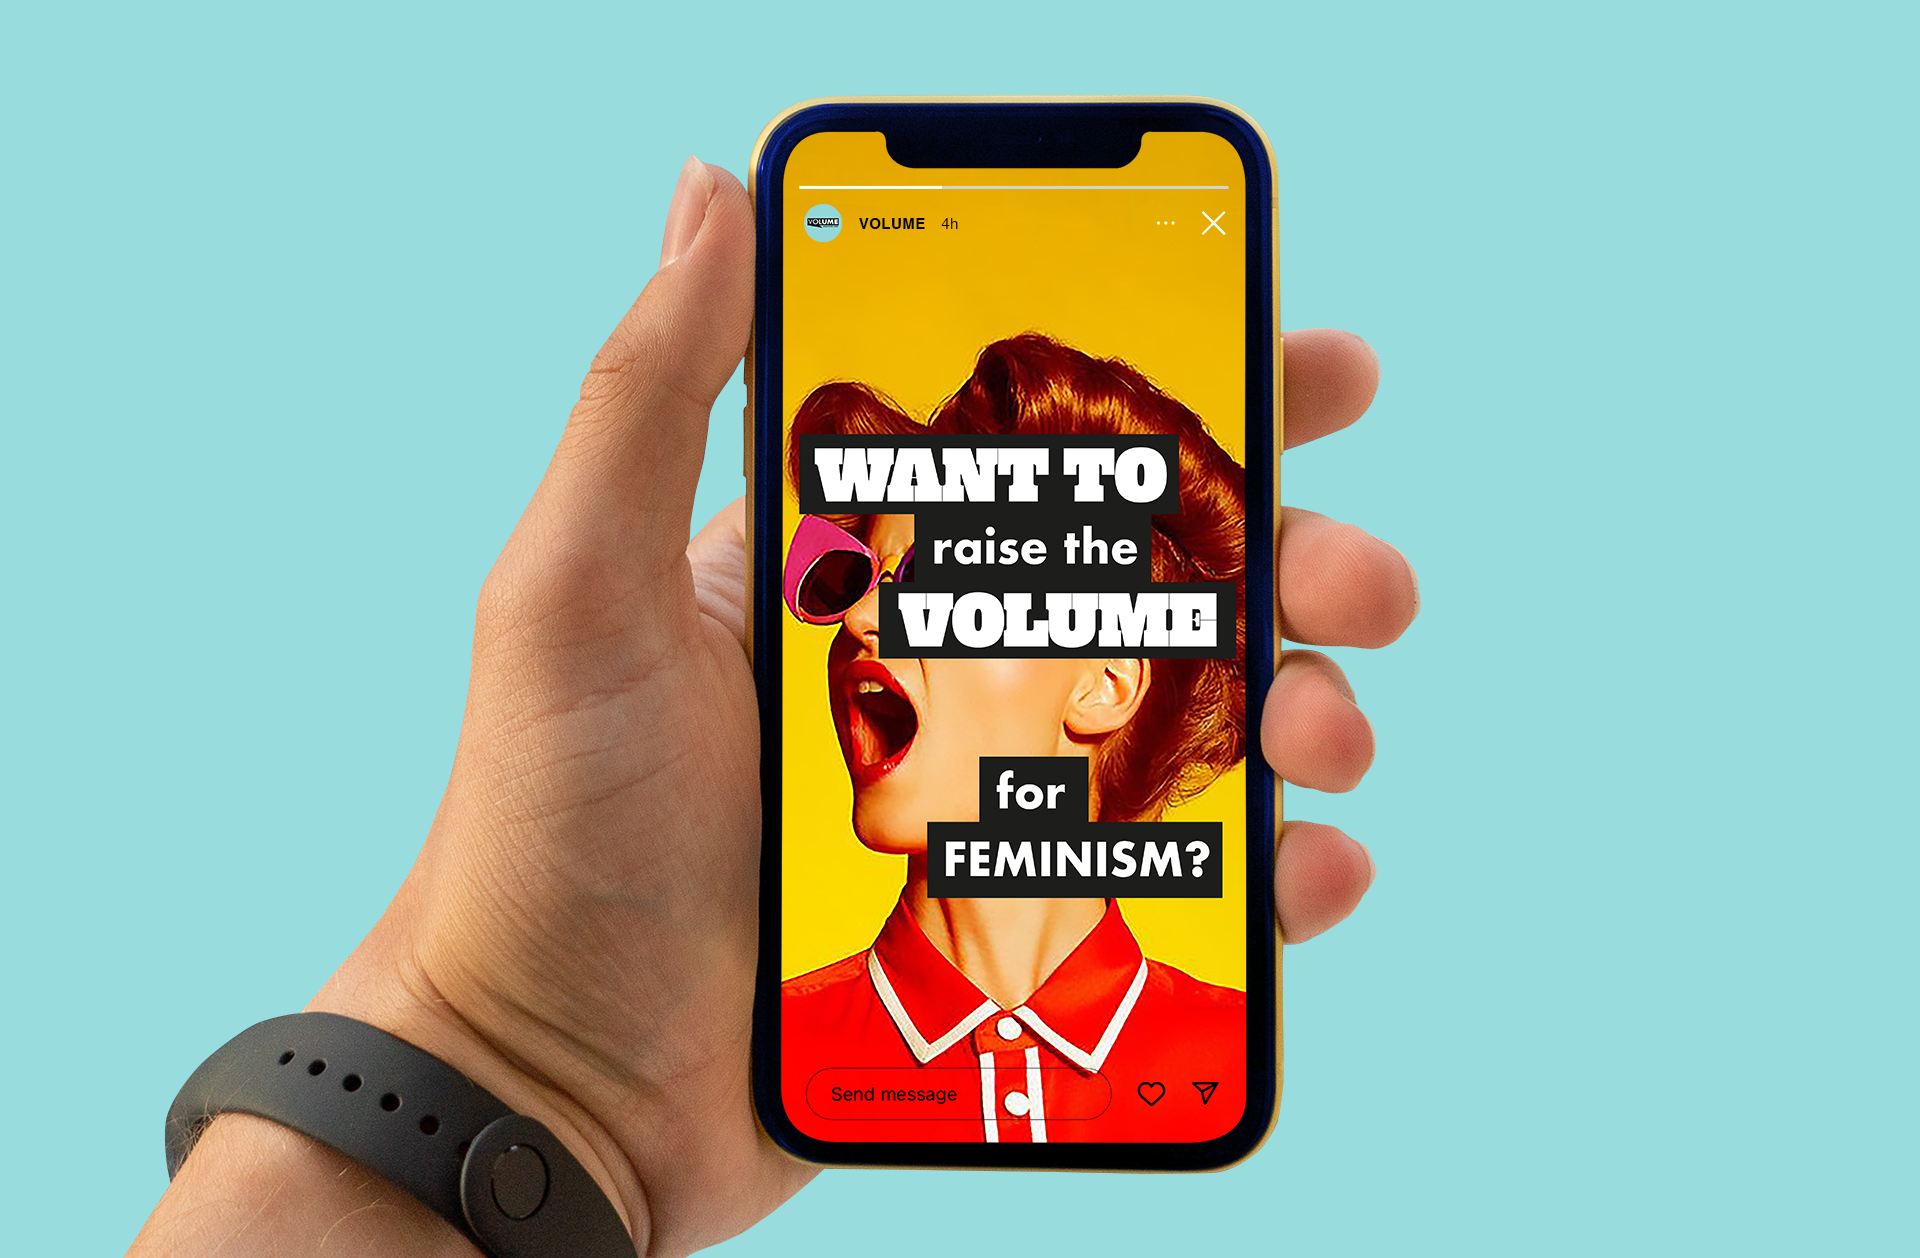 App design by Emily Morris showing a phone in a hand asking the user to raise the volume for feminism with their hair and join a VOLUME level points scheme.